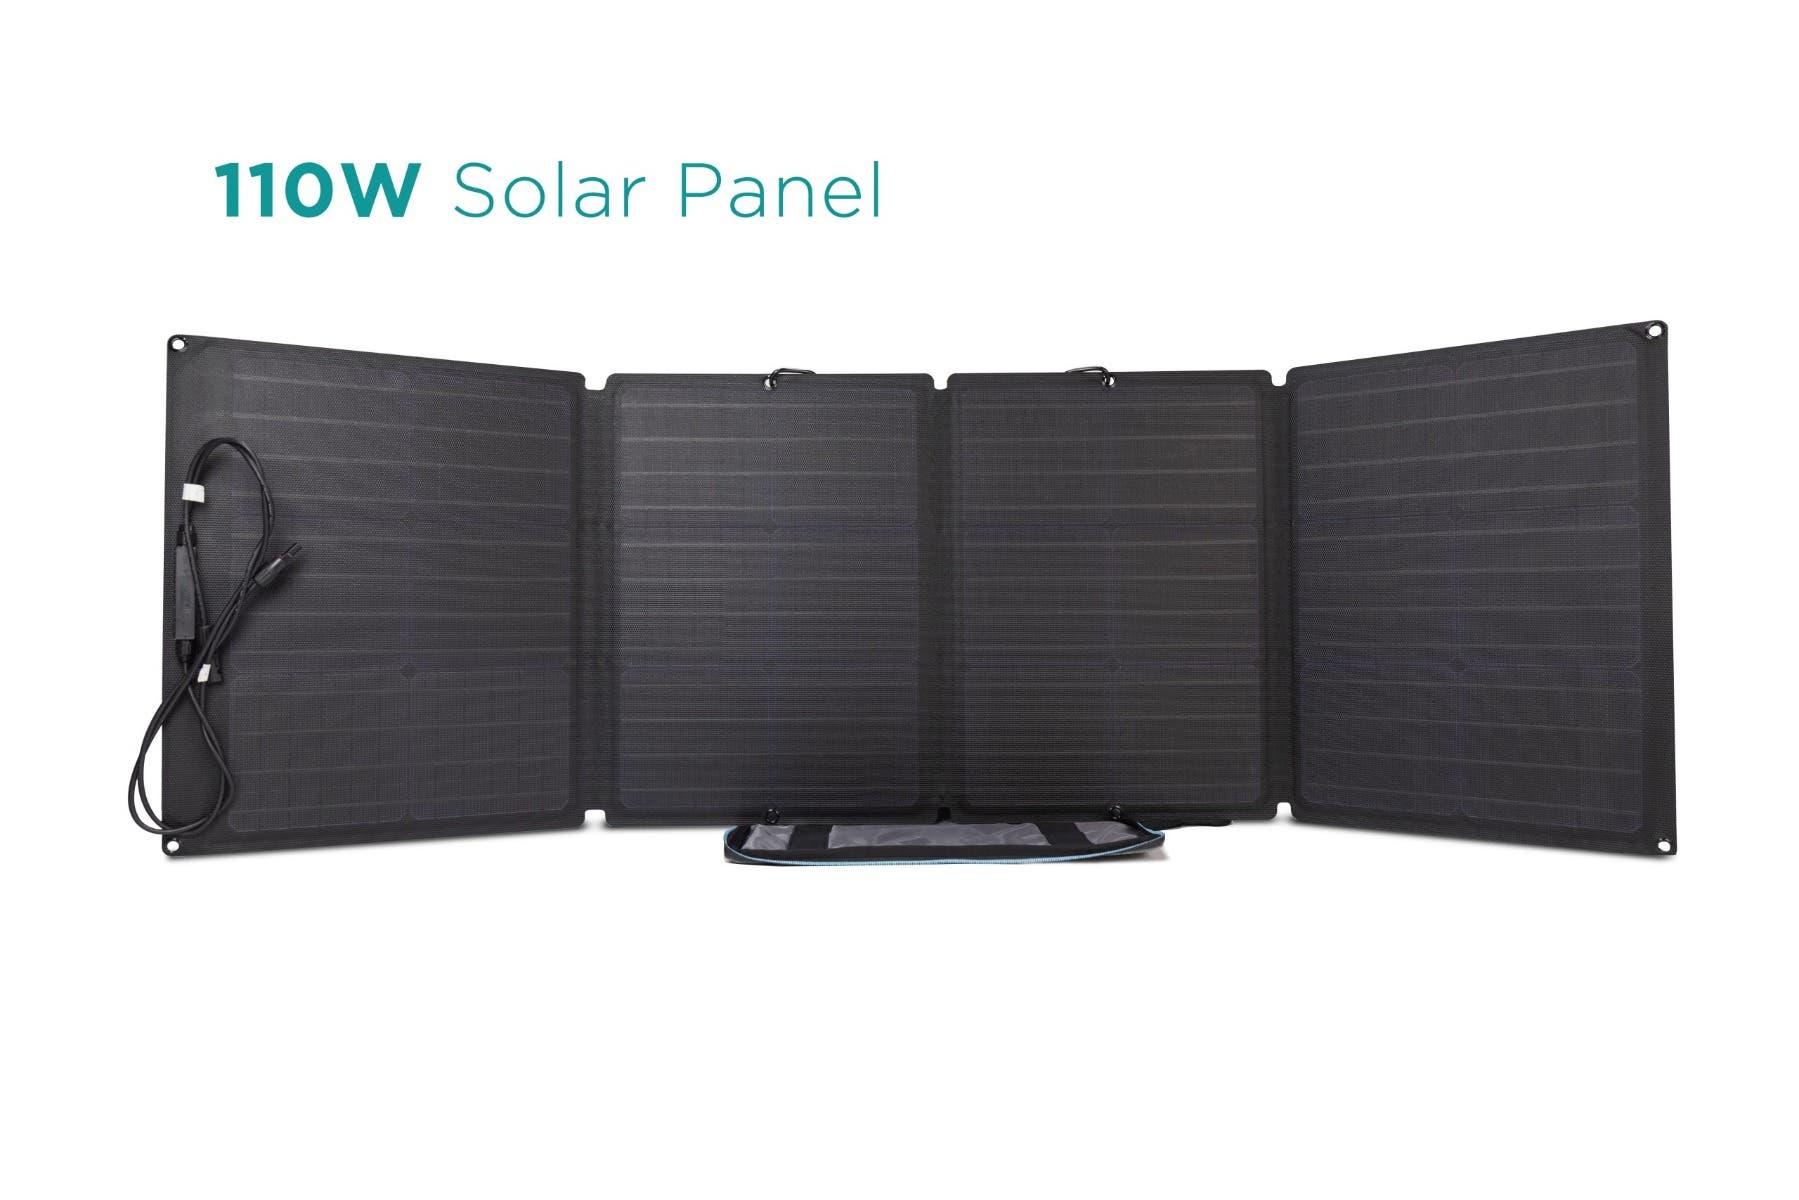 EcoFlow 110W Solar Panel, light weight and foldable - MS301